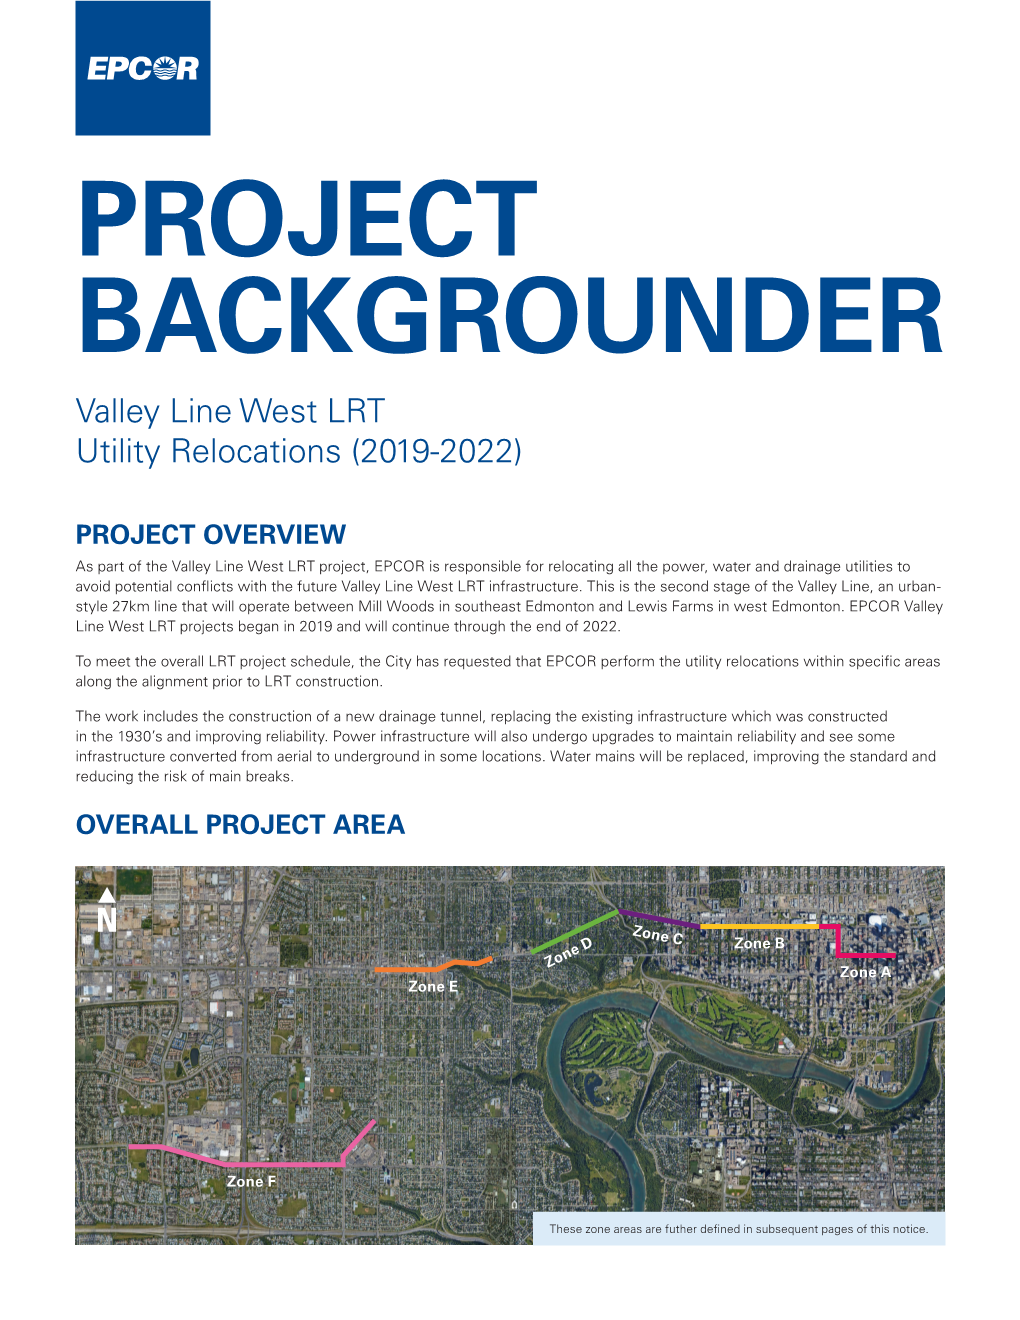 EPCOR Project Backgrounder